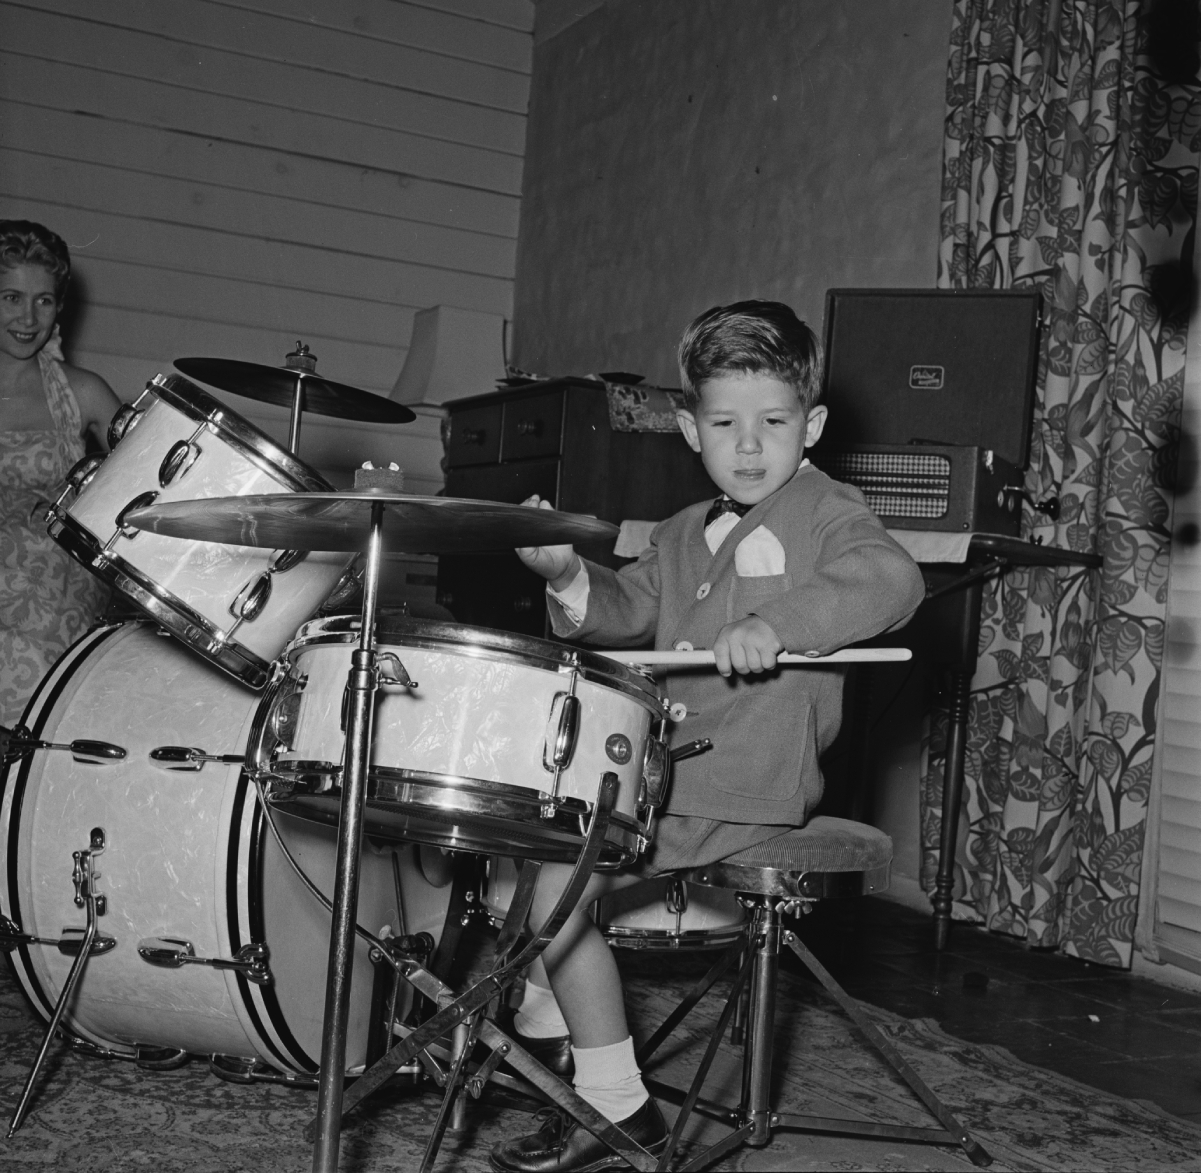 Keith Thibodeaux on the drums, 1955